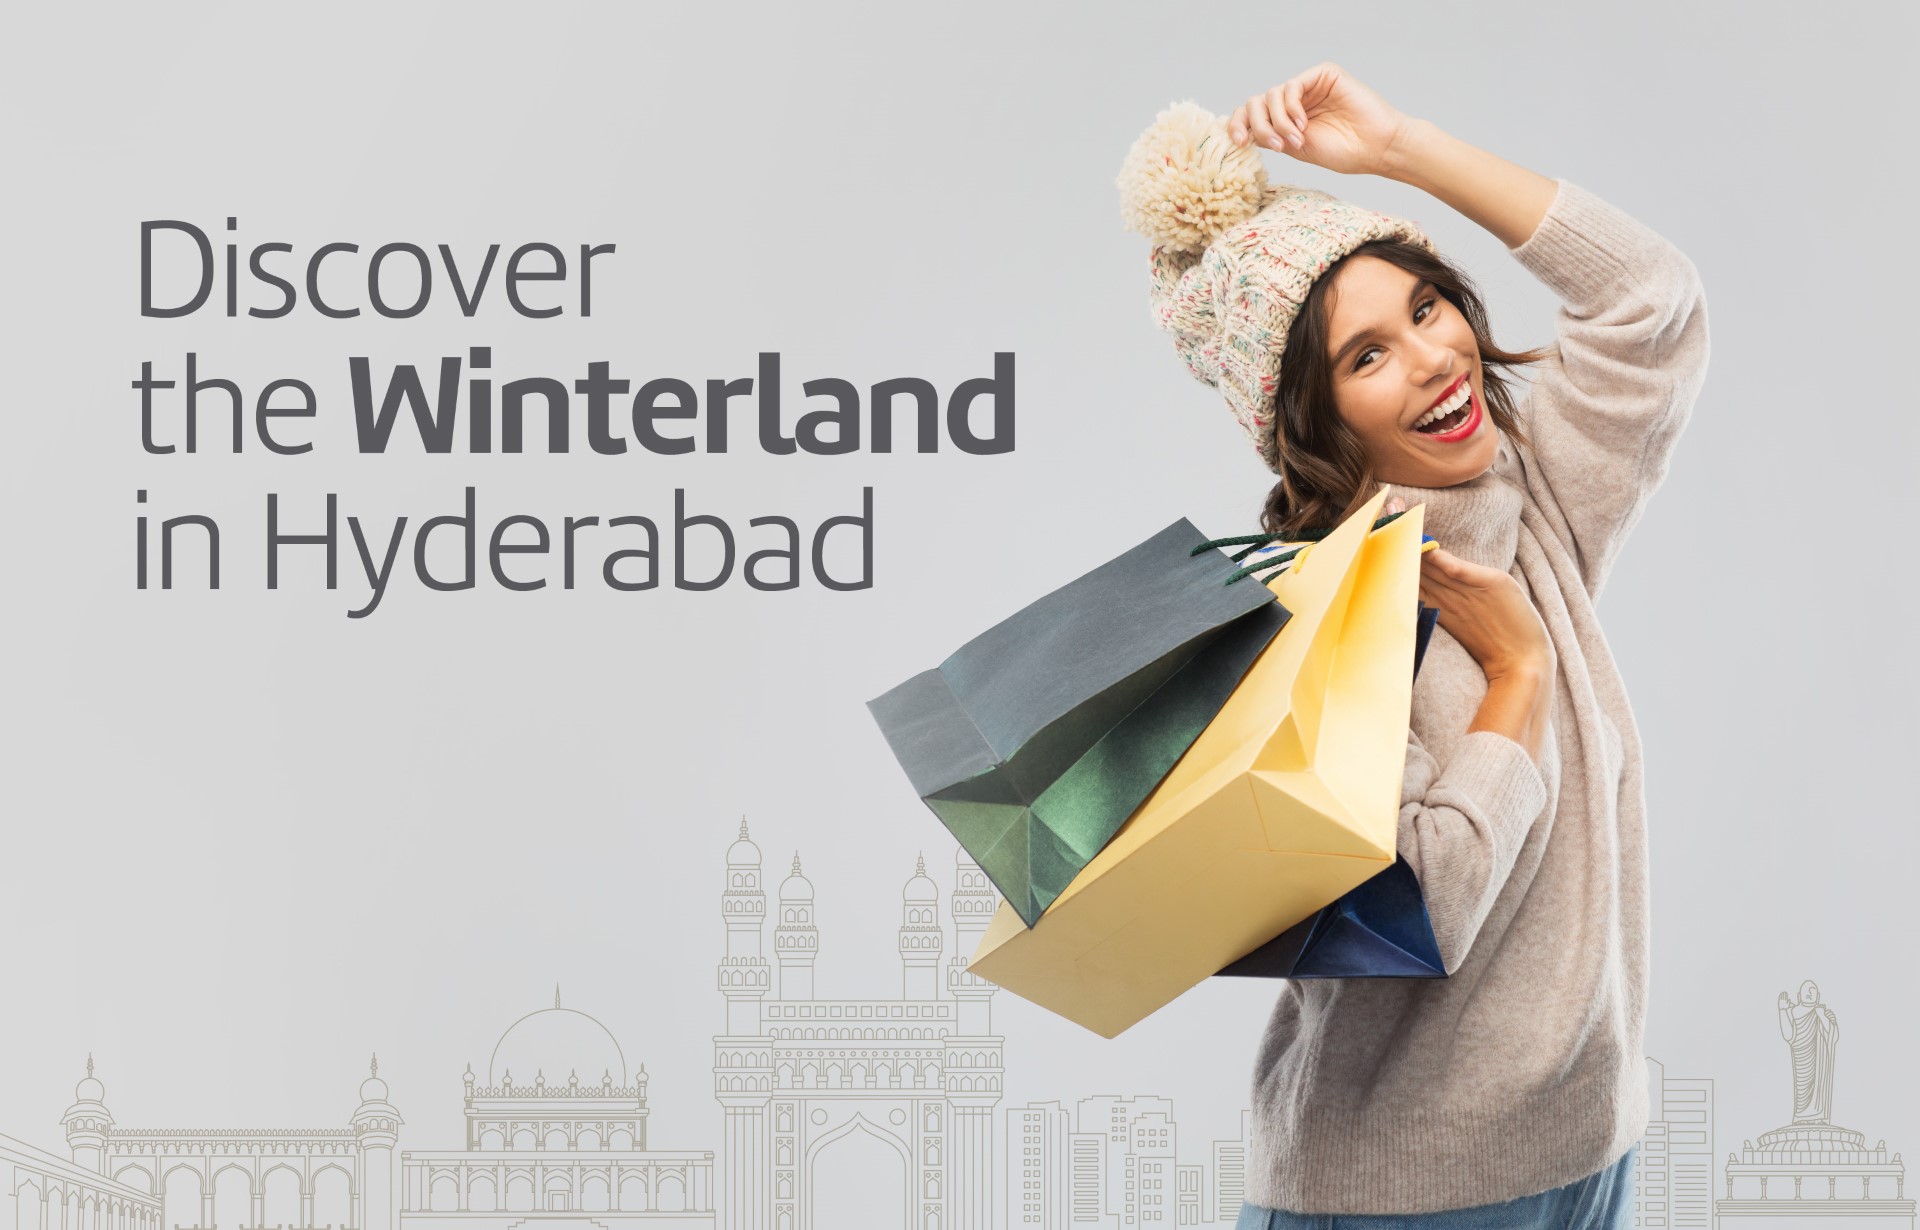 Discover the winterland in Hyderabad